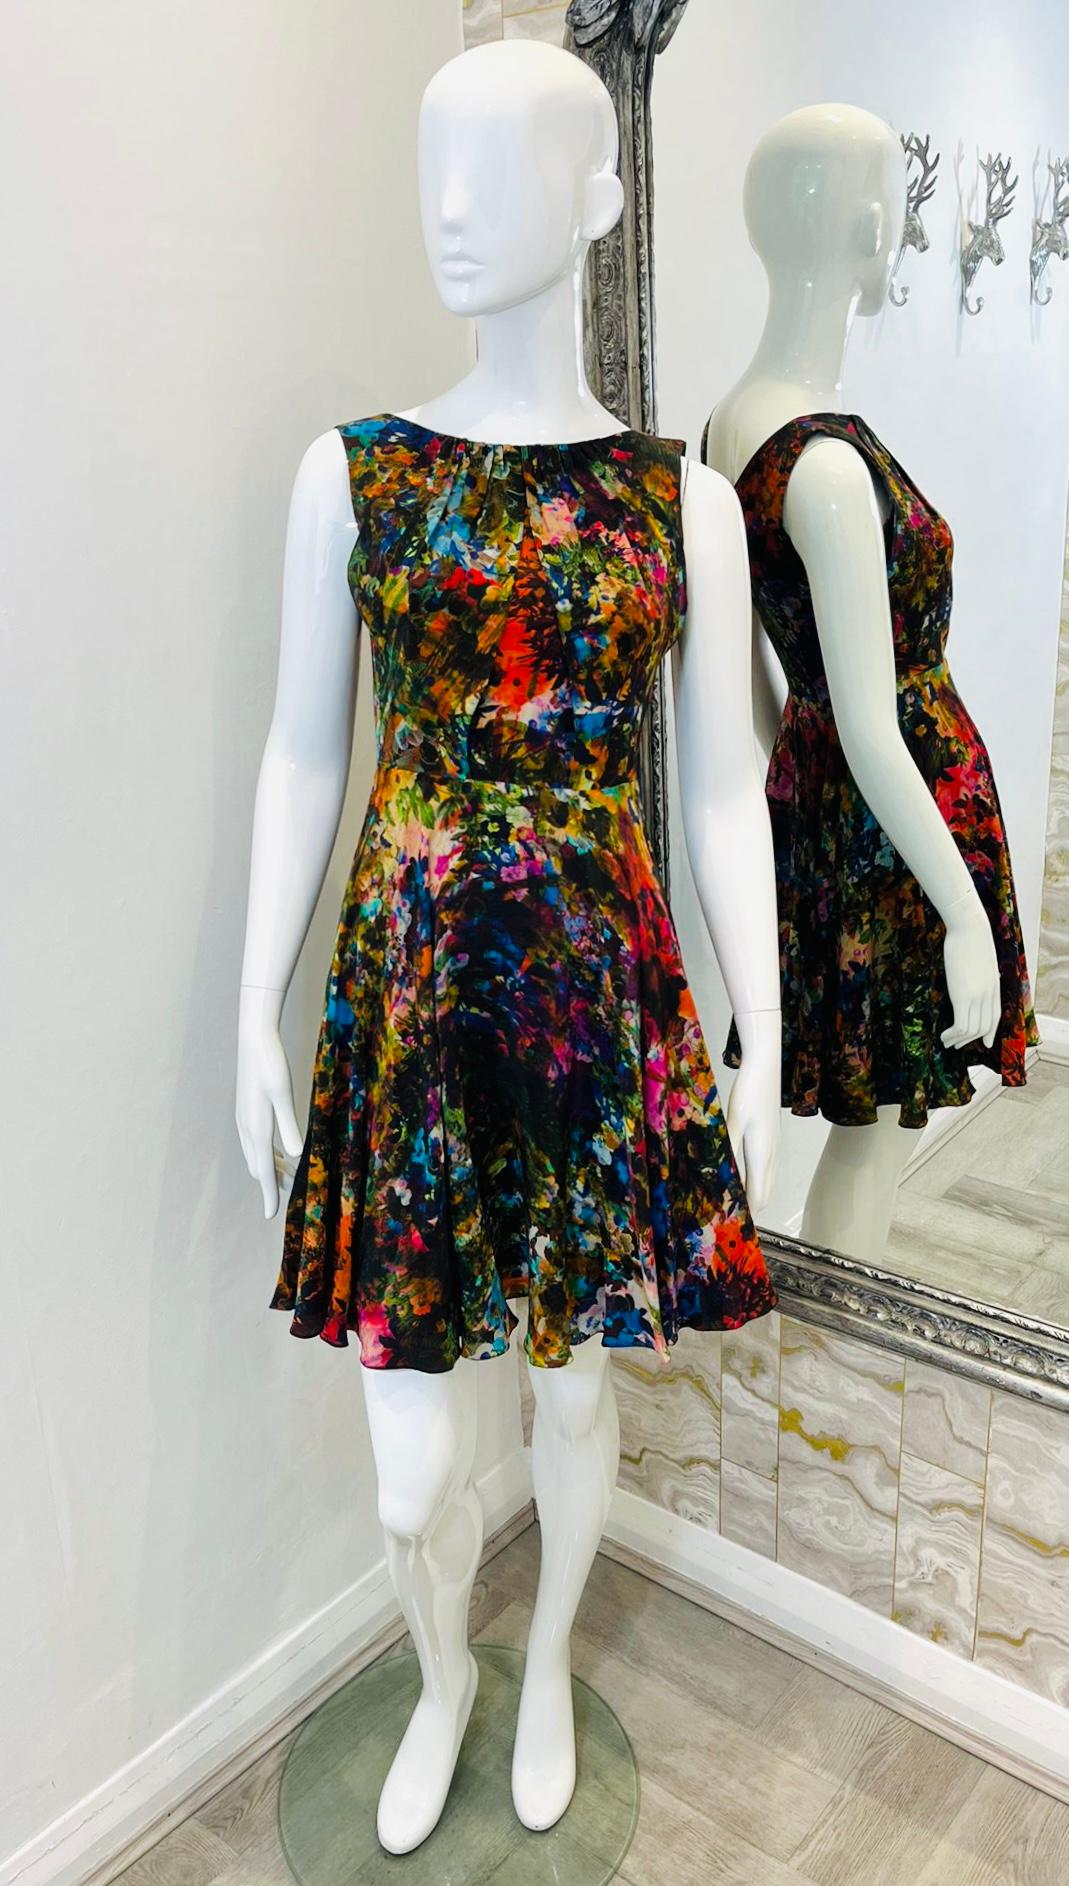 Erdem Fit & Flare Printed Silk Dress

Dark, multicoloured dress detailed with abstract/floral print and plisse detailing to the neckline.

Featuring pleated, mid-thigh length, flared skirt and sleeveless design.

Styled with boat neckline to the